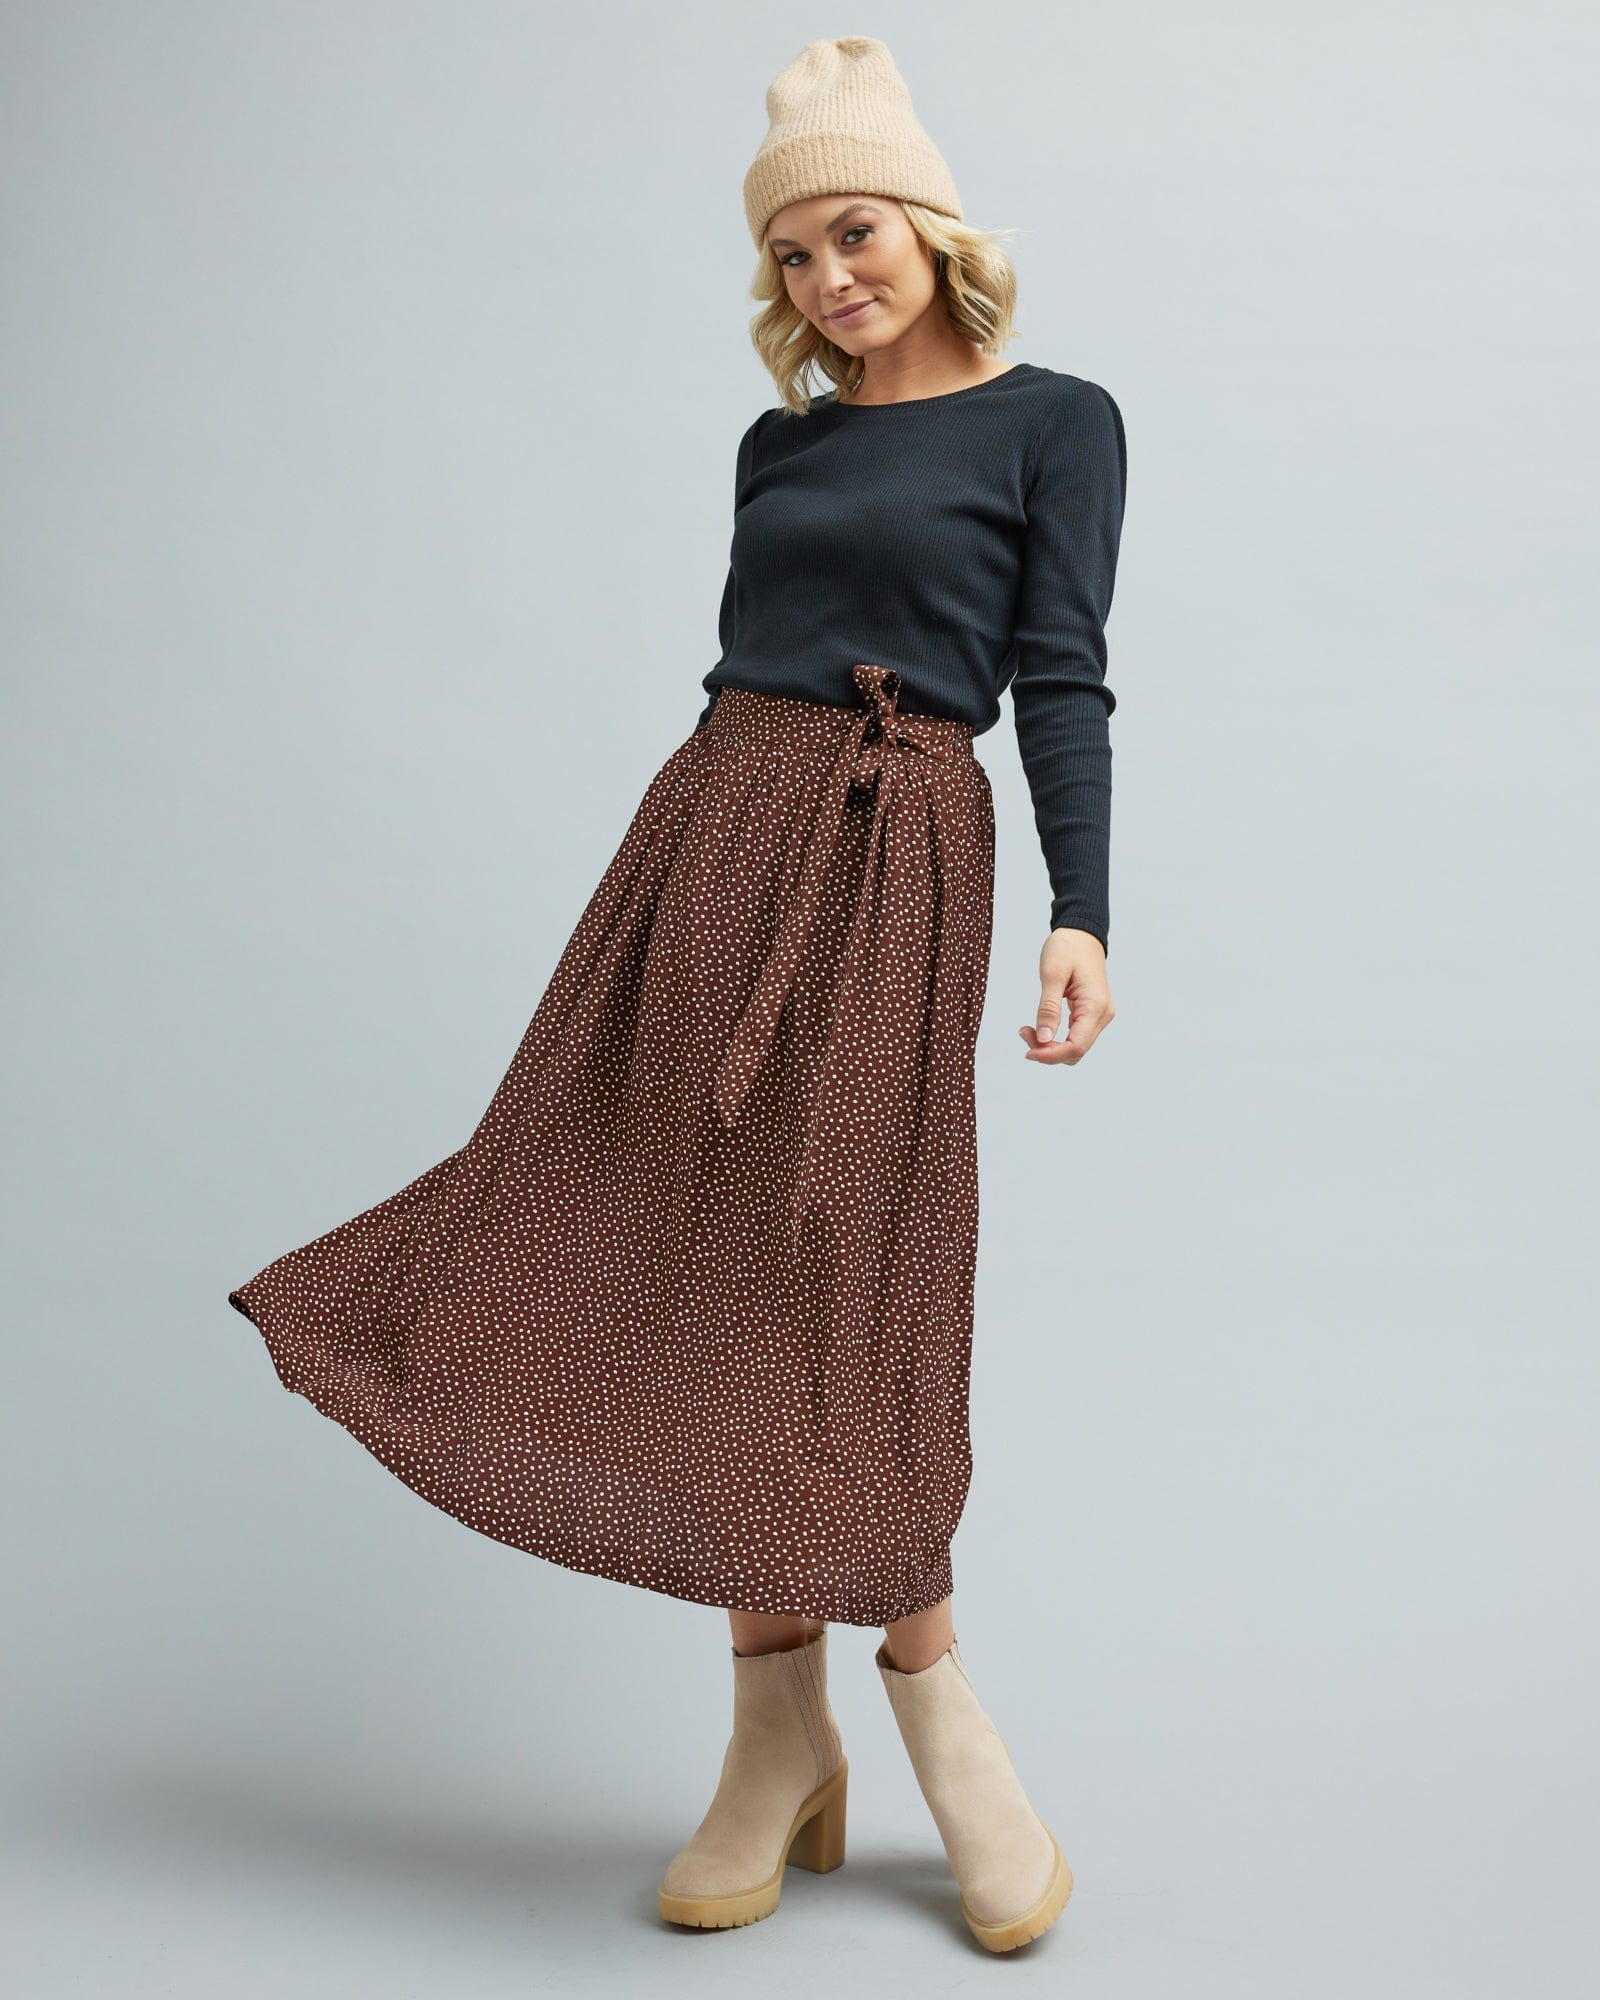 Woman in a brown, midi length skirt